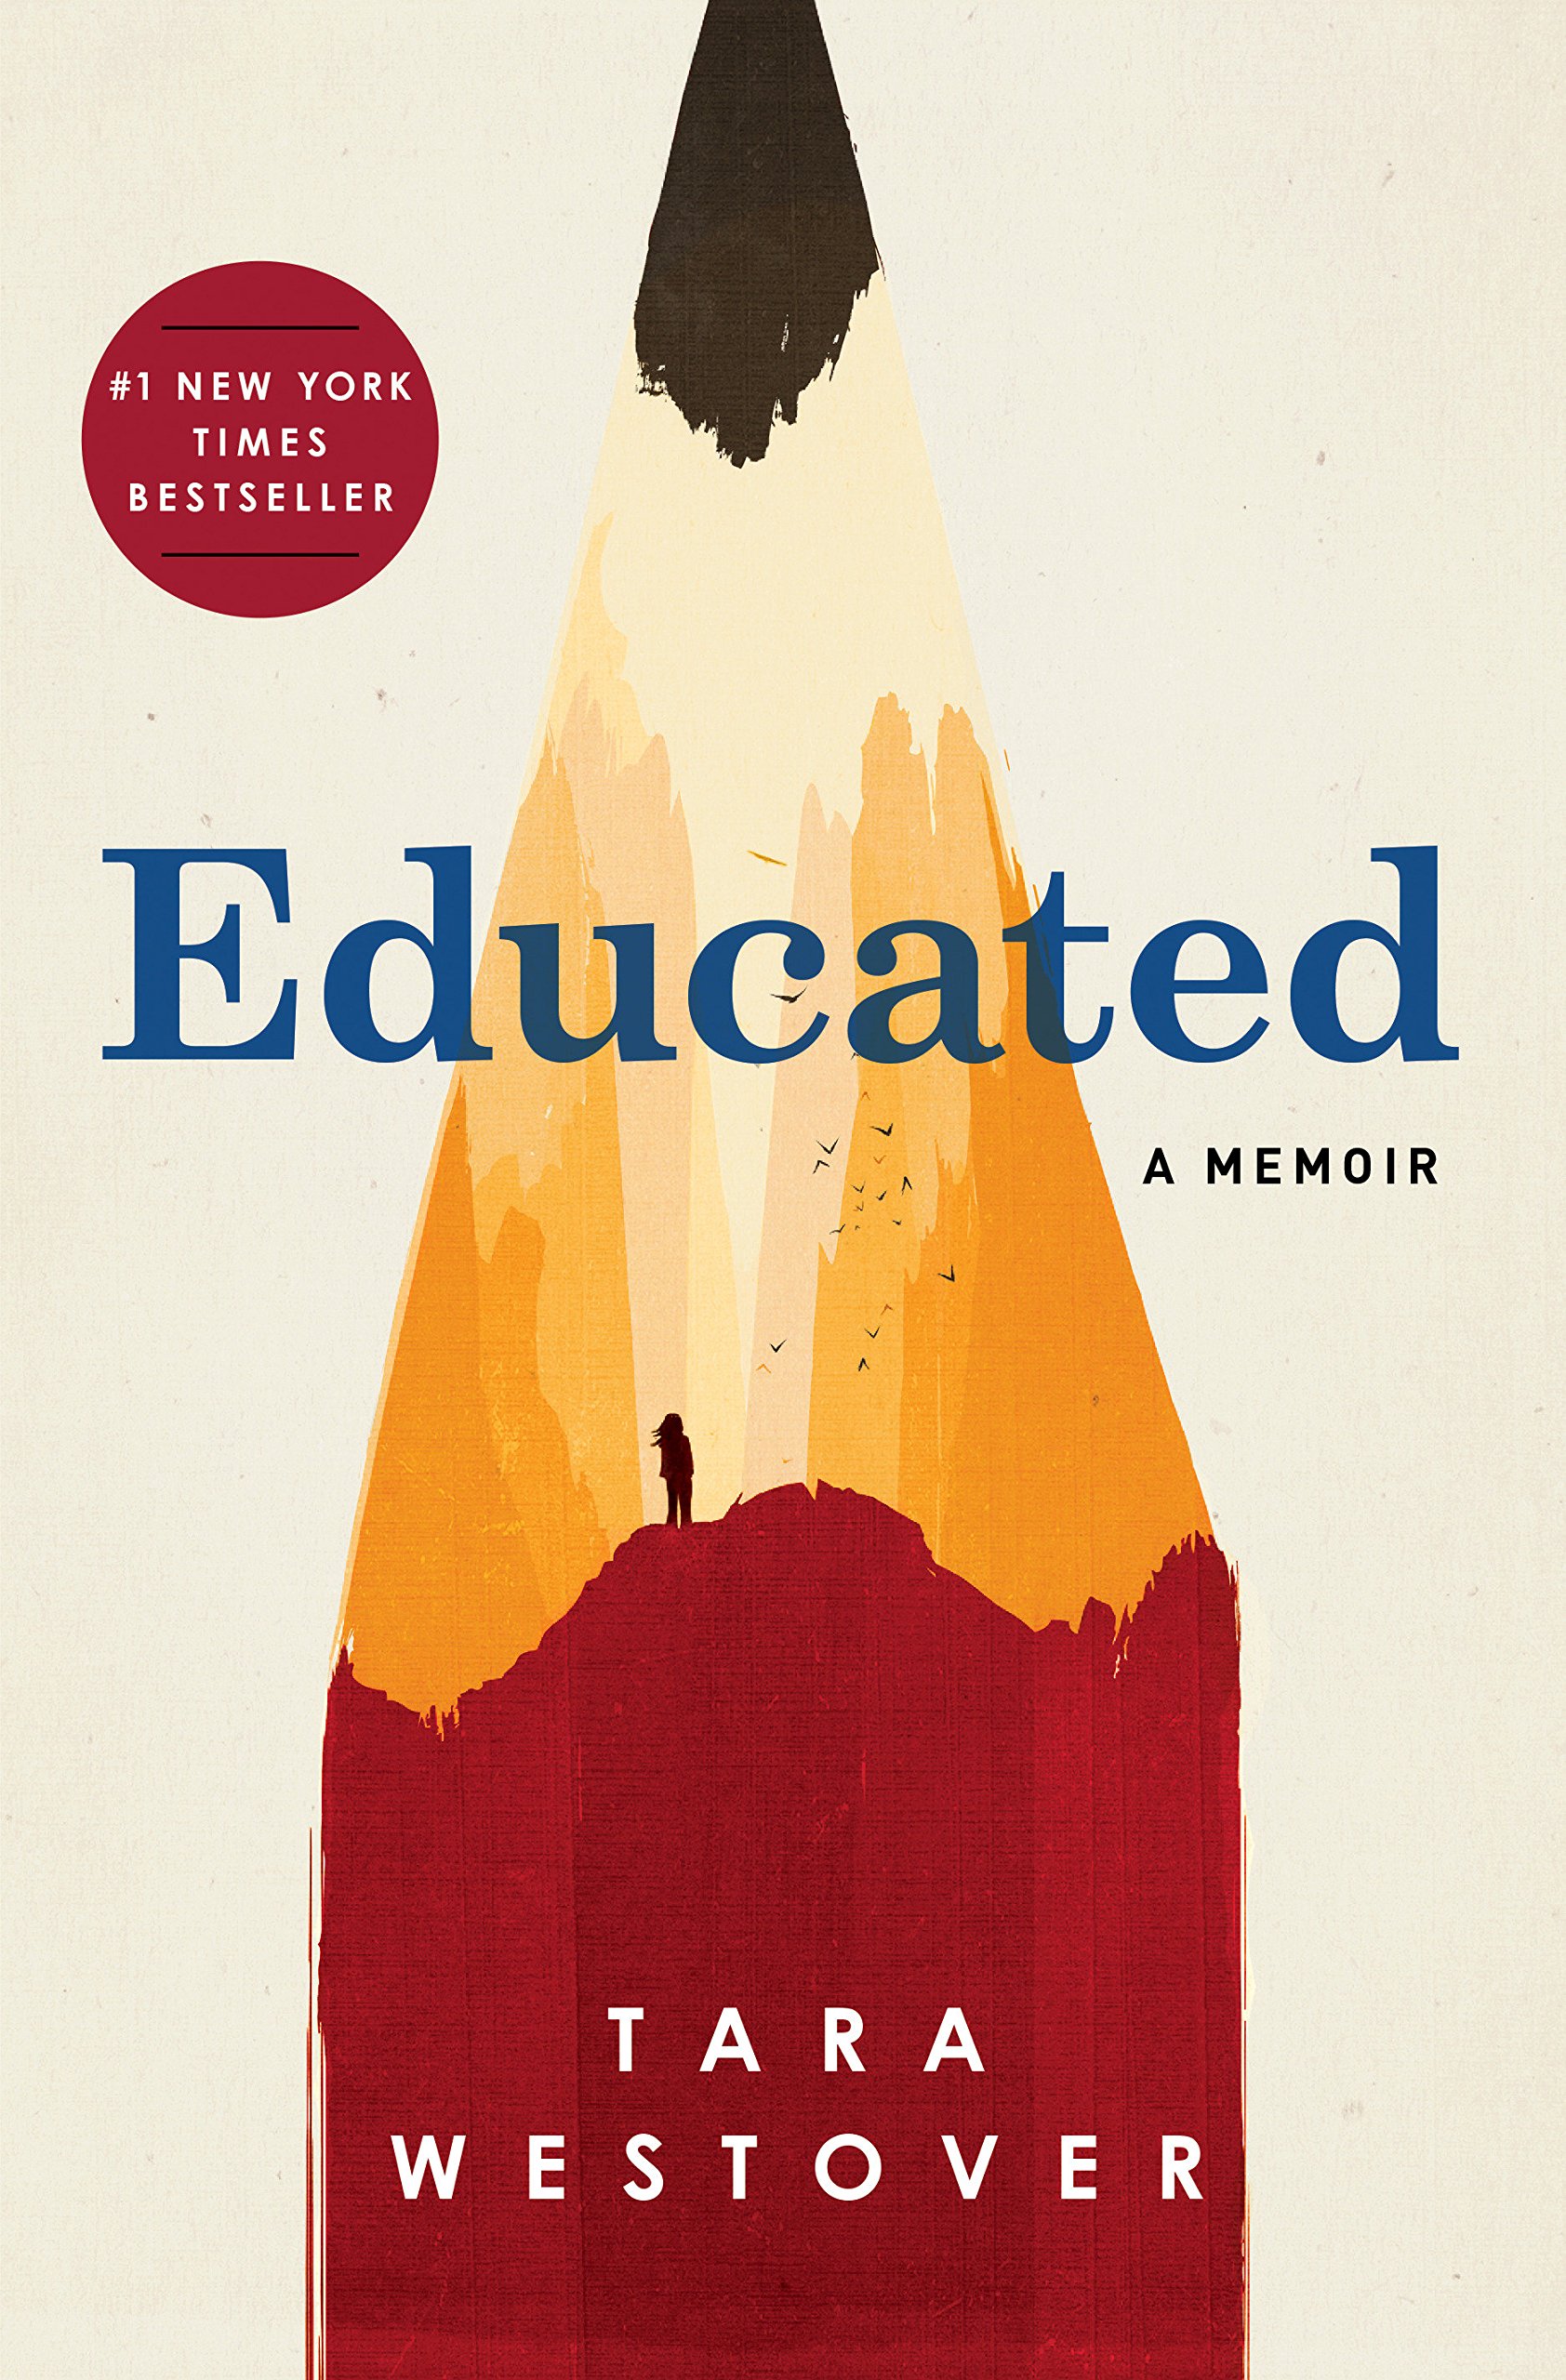 Book cover for Educated by Tara Westover.